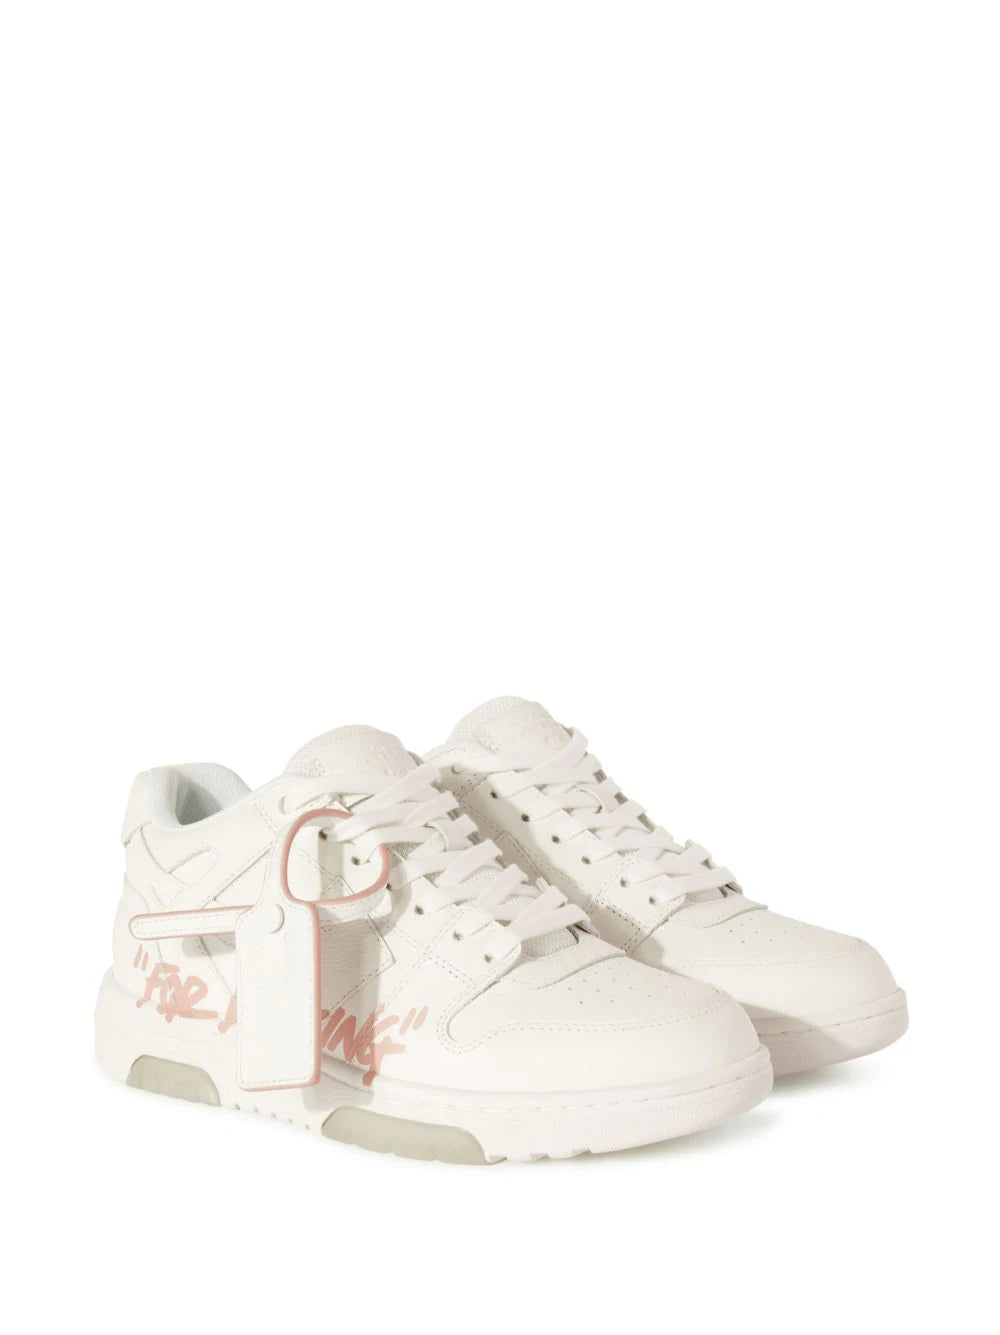 OFF-WHITE WOMEN Out Of Office "For Walking" Leather Sneakers White/Pink - MAISONDEFASHION.COM